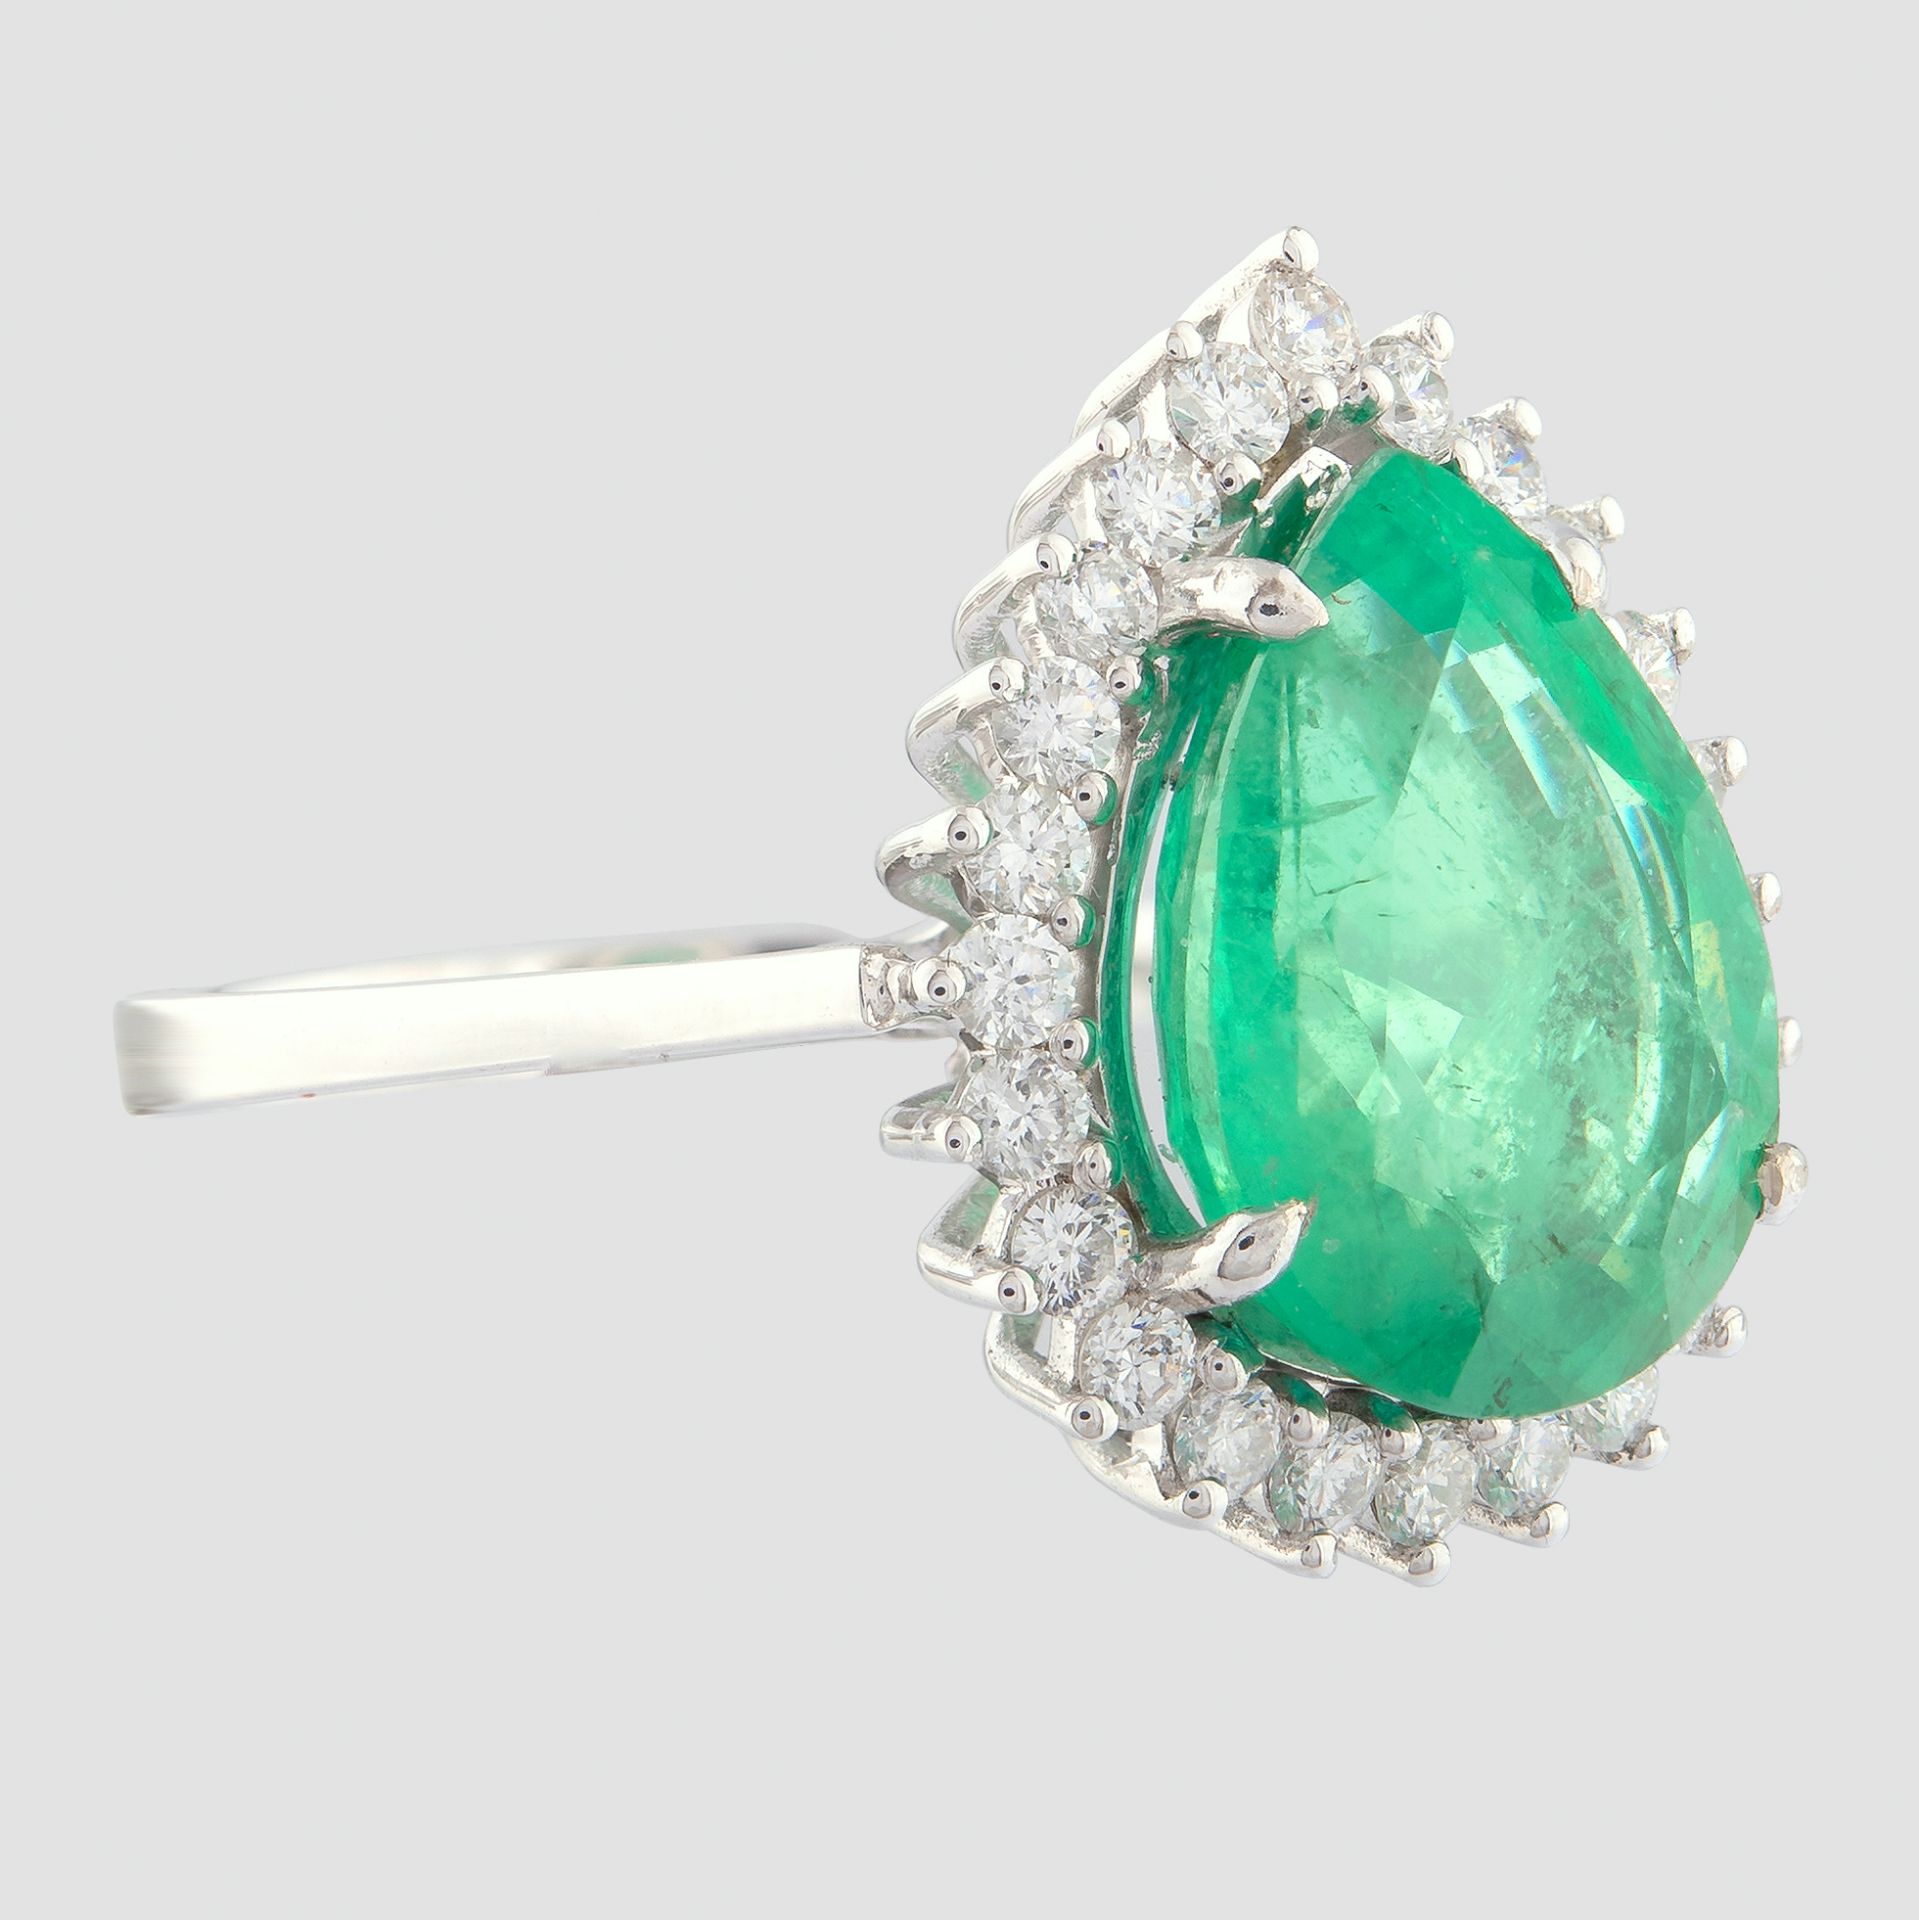 14K White Gold Cluster Ring - 4,75 Ct. Natural Emerald - 0,60 Ct. Diamond - Image 3 of 4